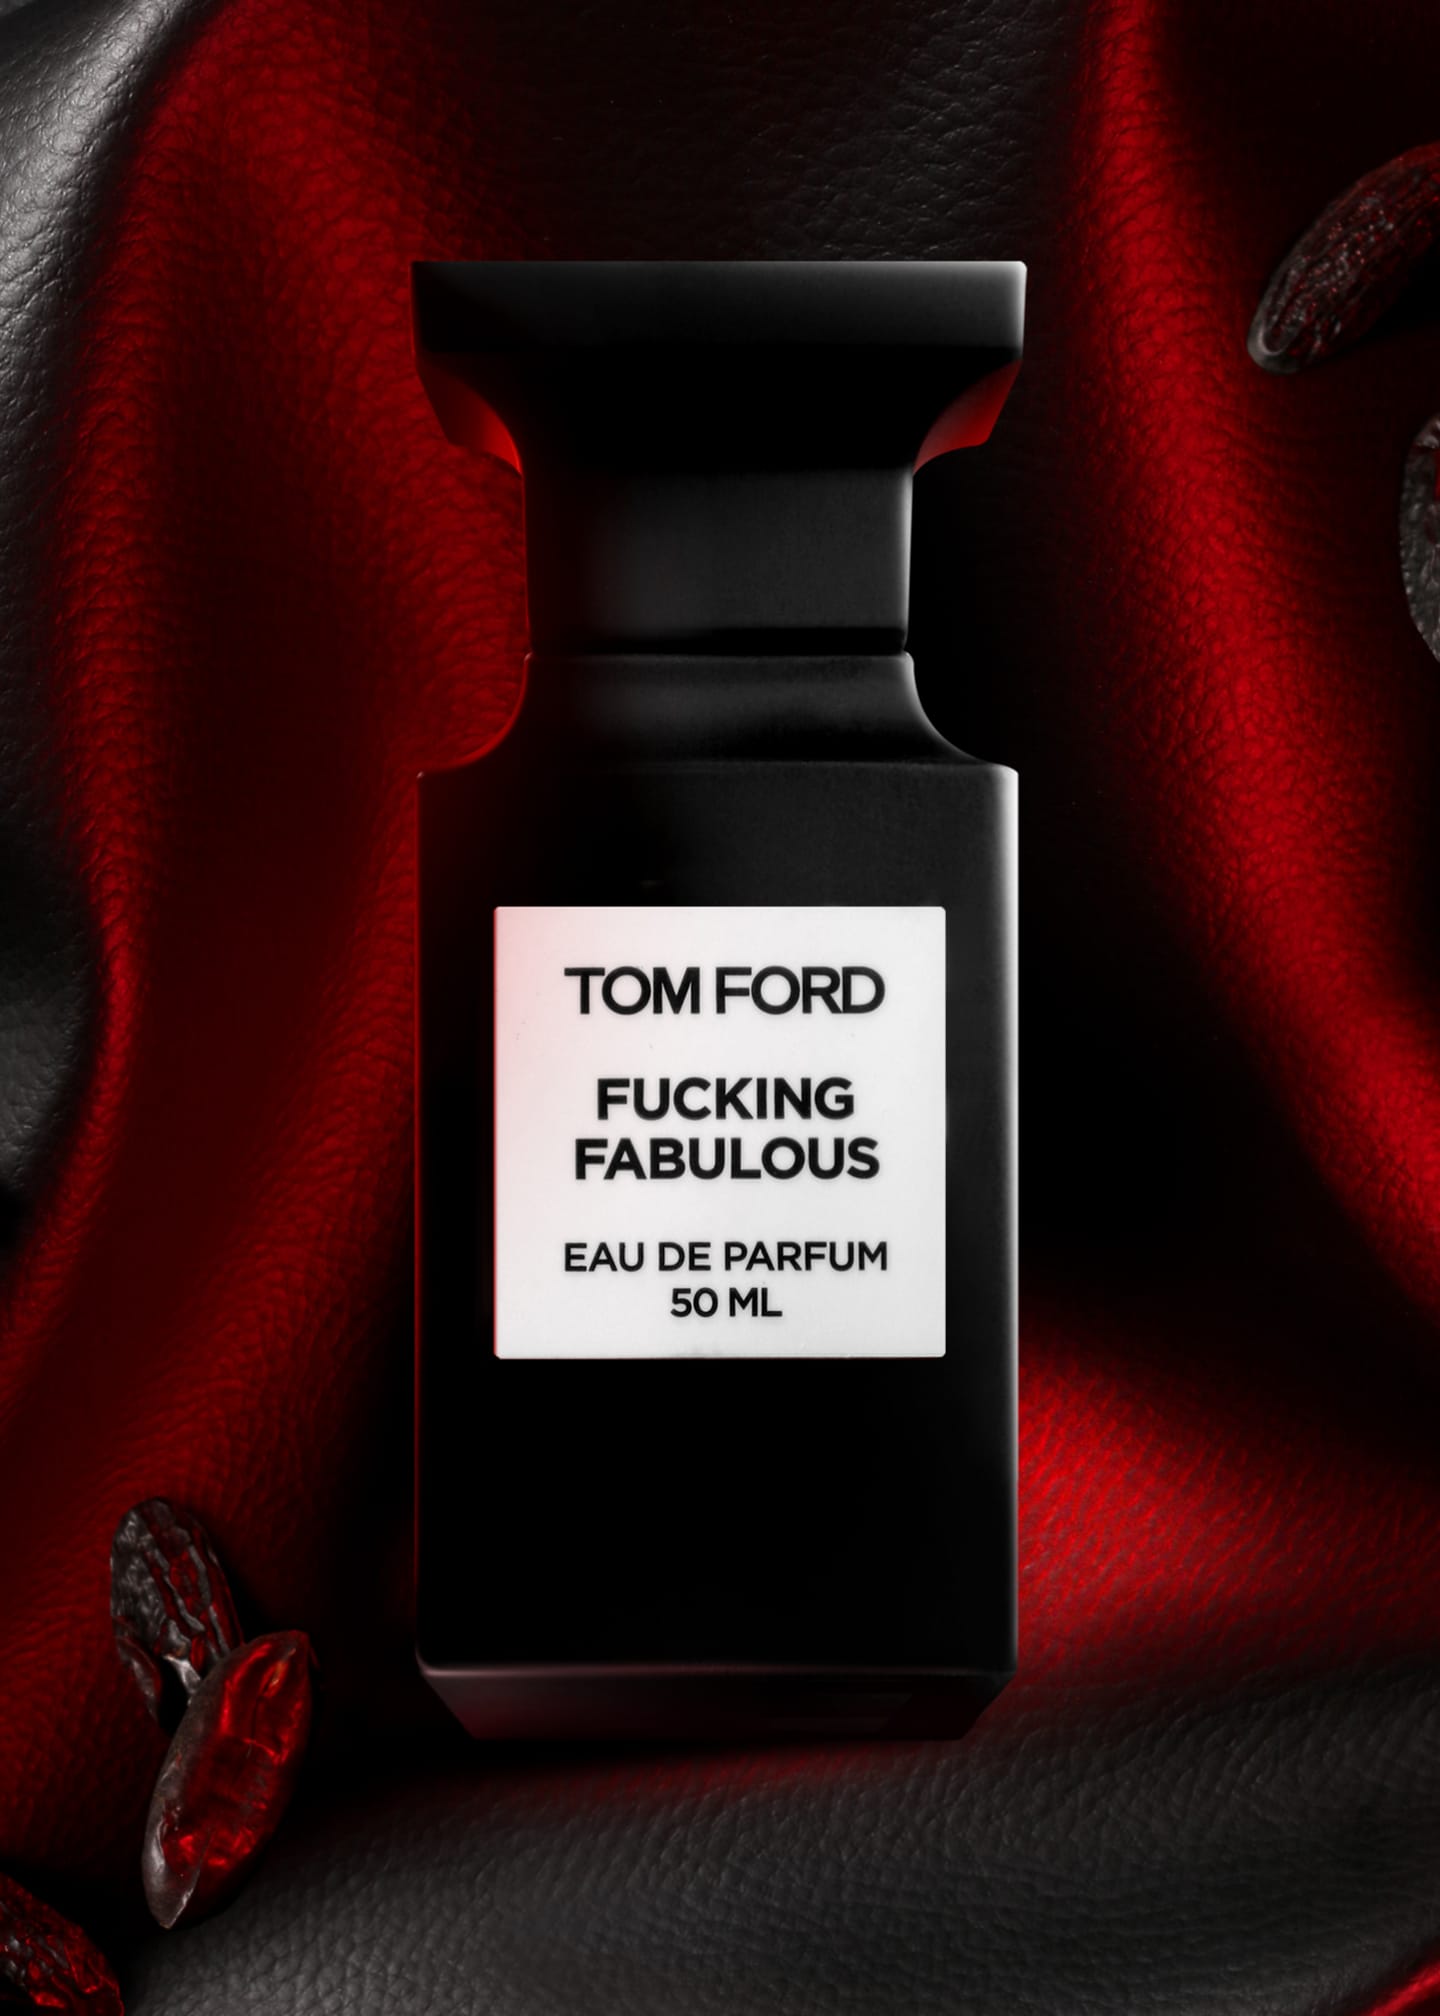 TOM FORD Fabulous Home Candle Image 2 of 2